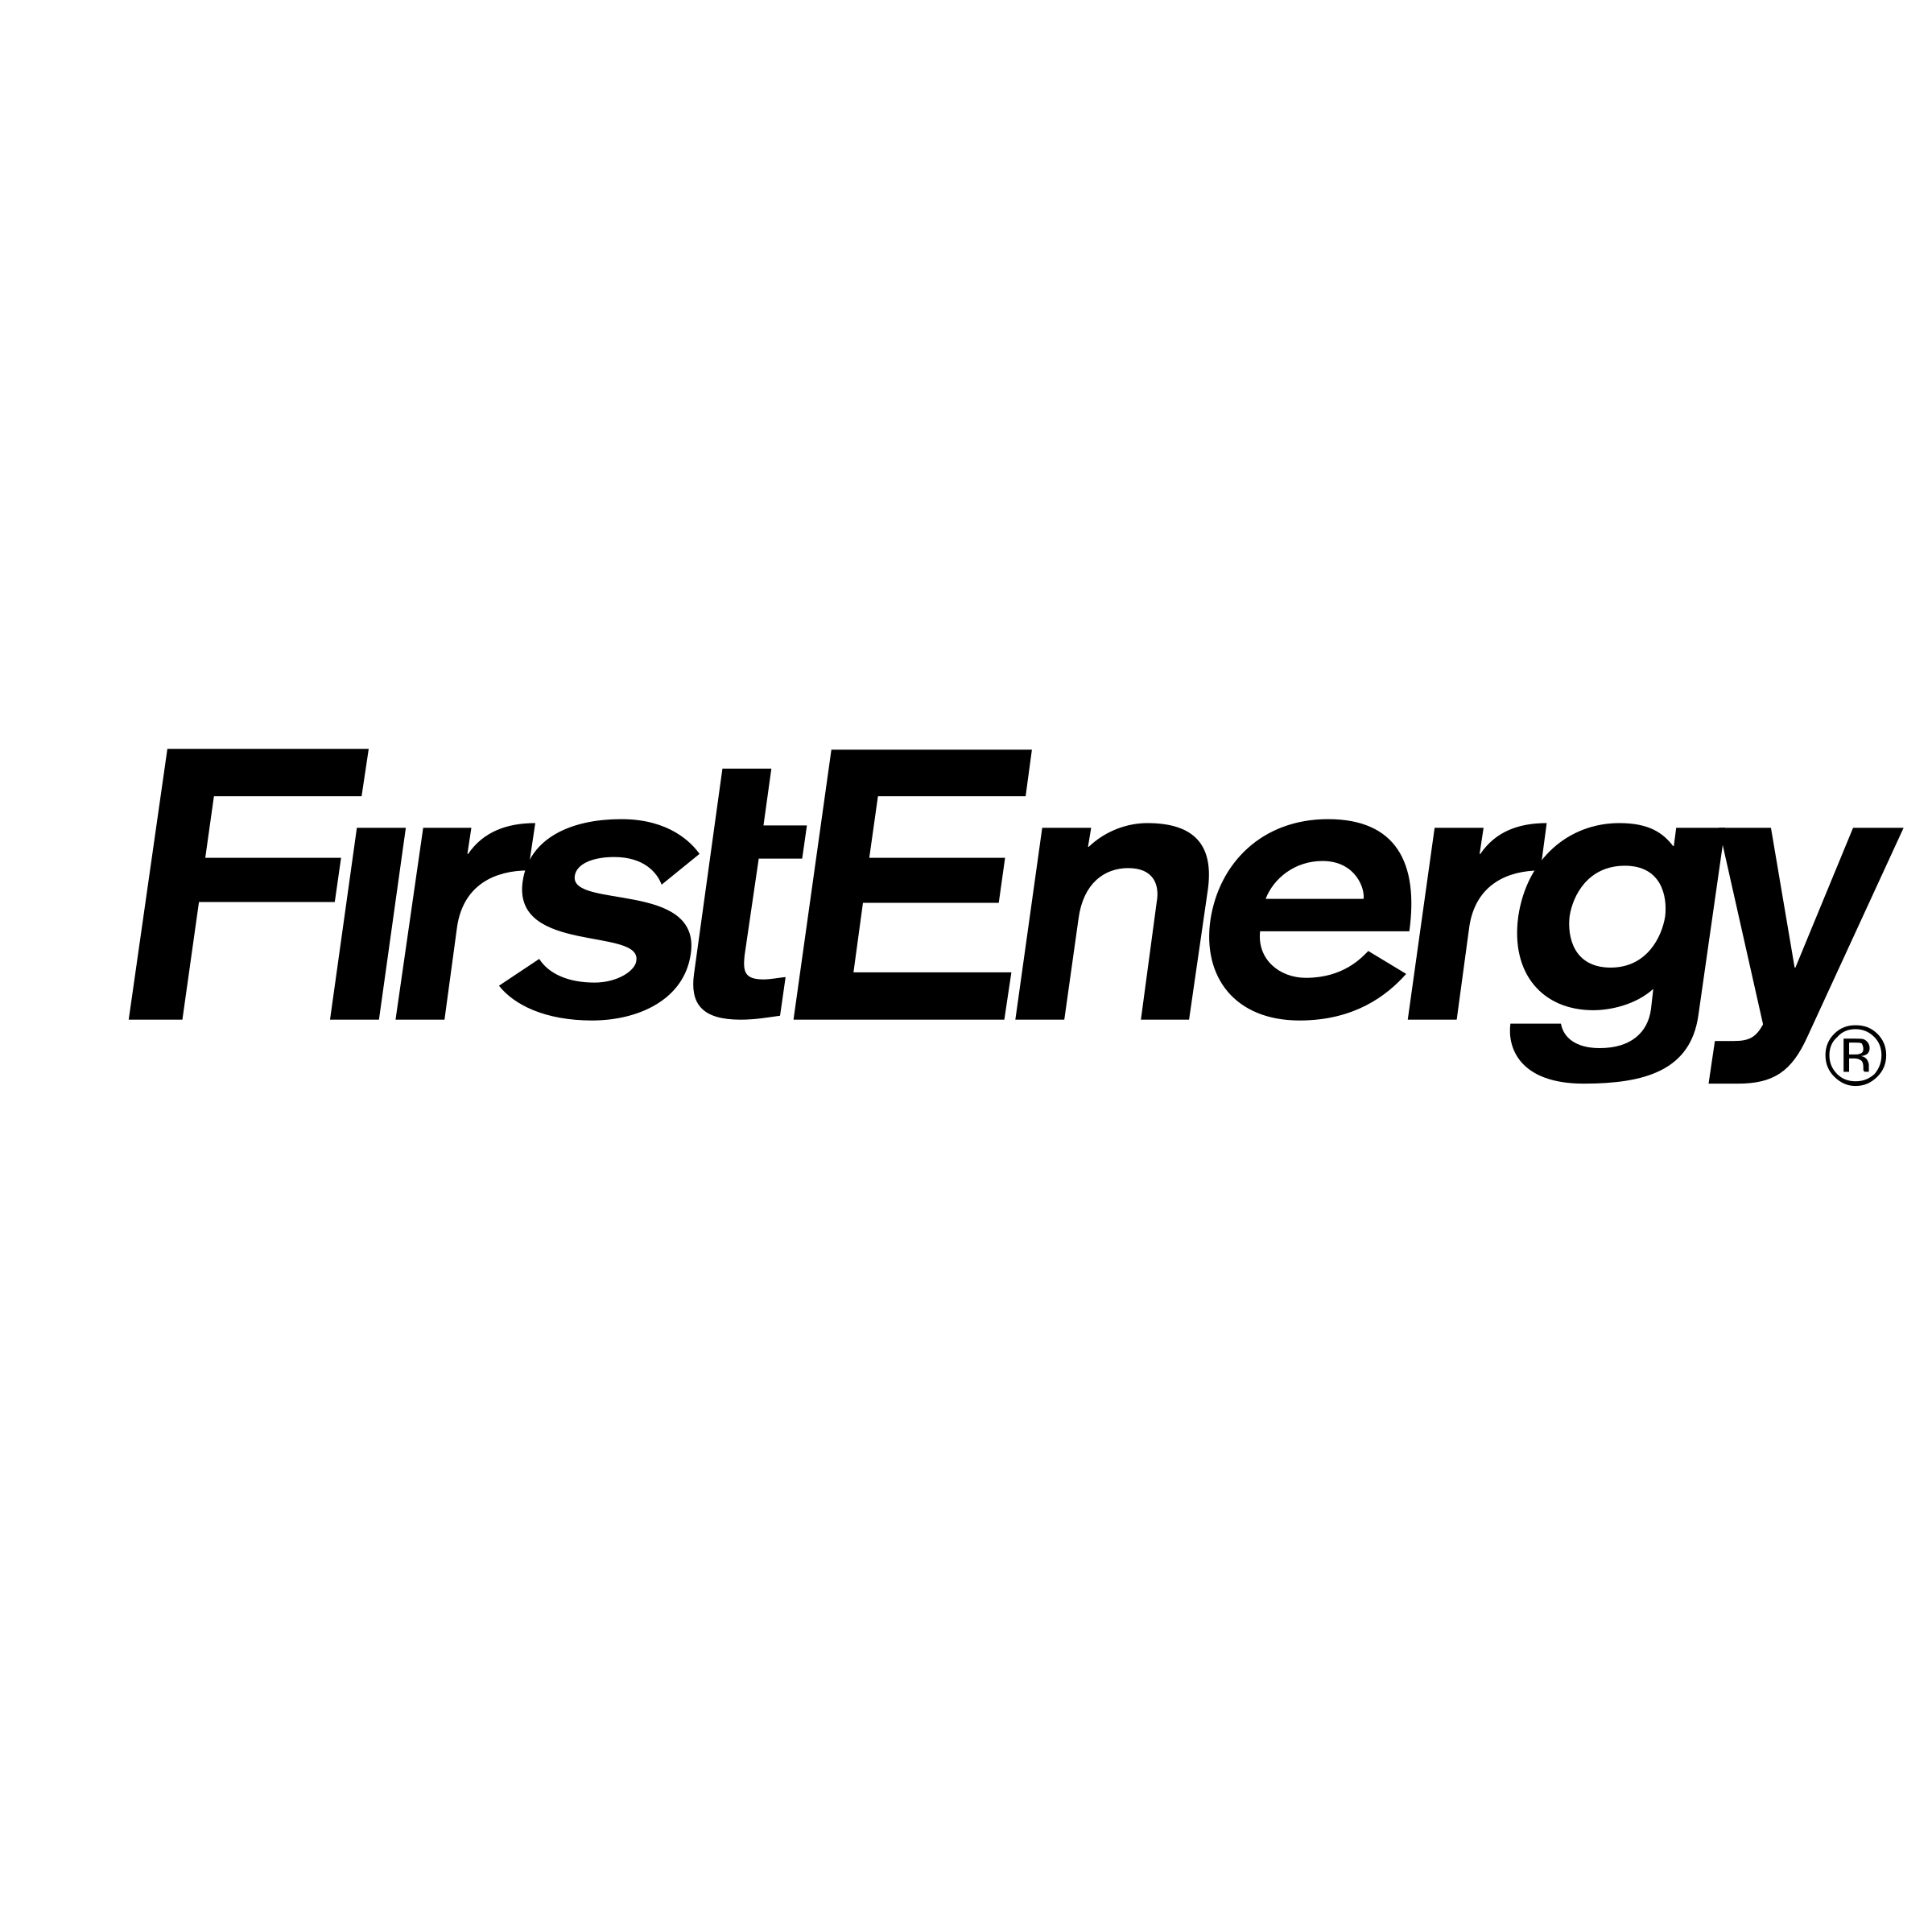 FirstEnergy Logo - FirstEnergy Logo PNG Transparent & SVG Vector